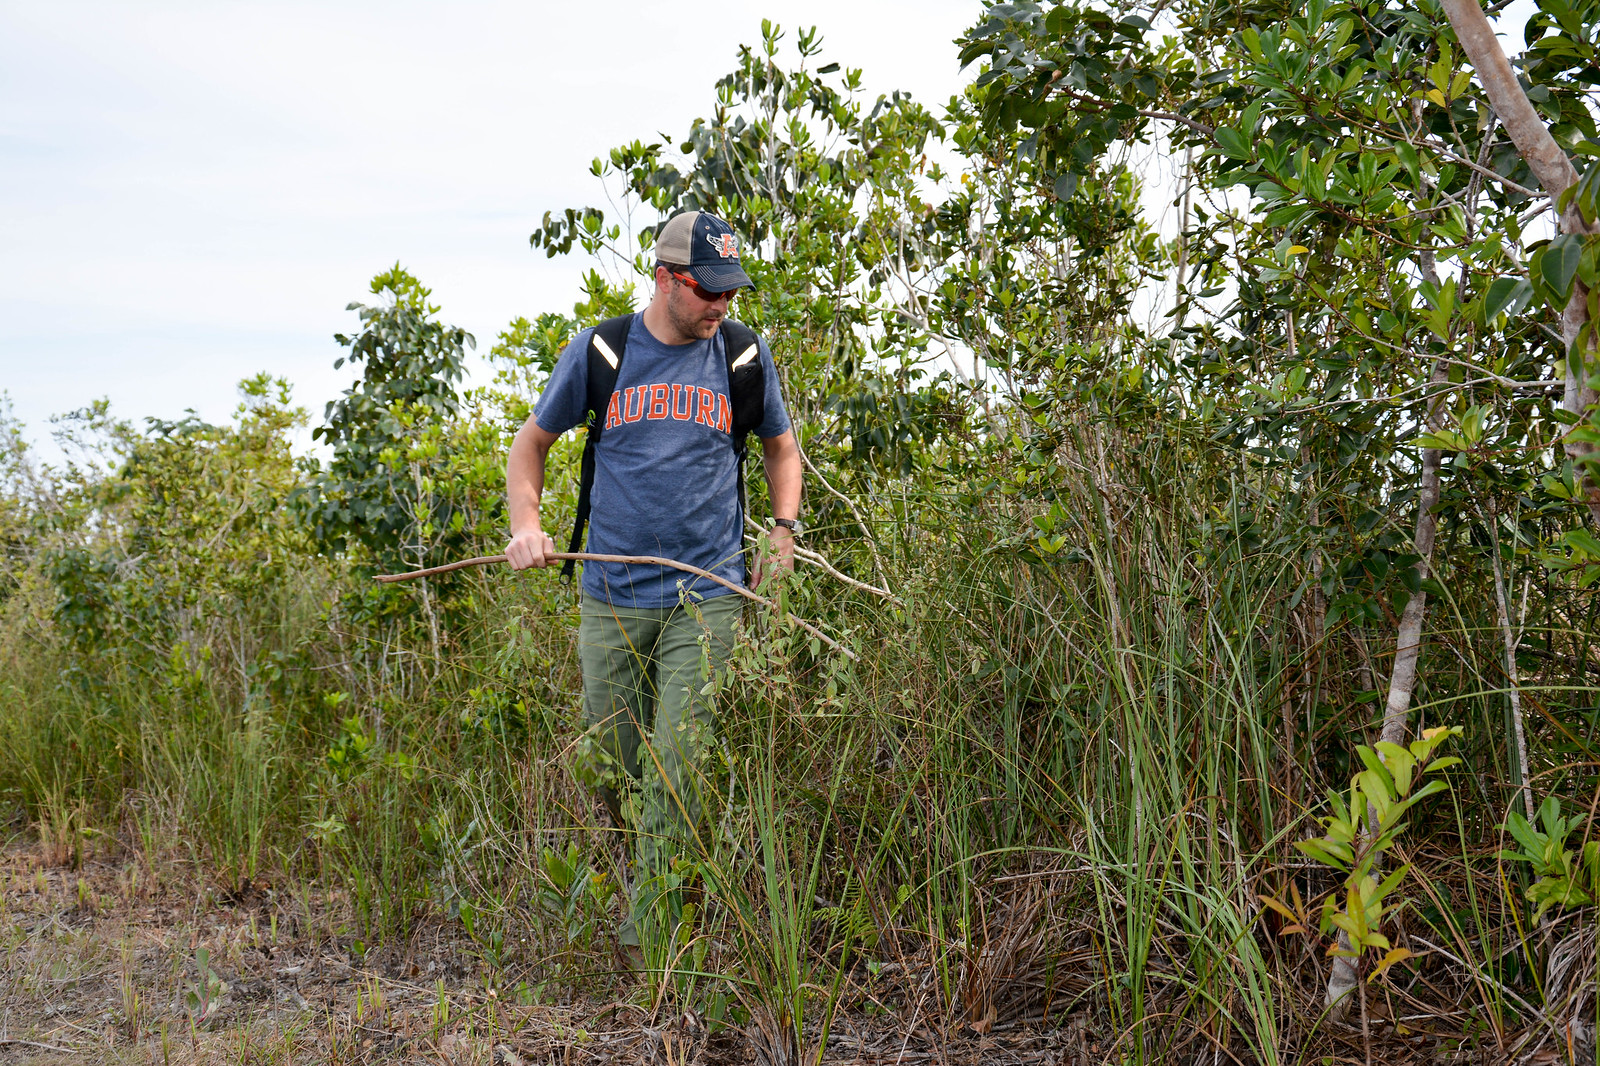 Stephen Neslege using two sticks in tall grass to search for pythons